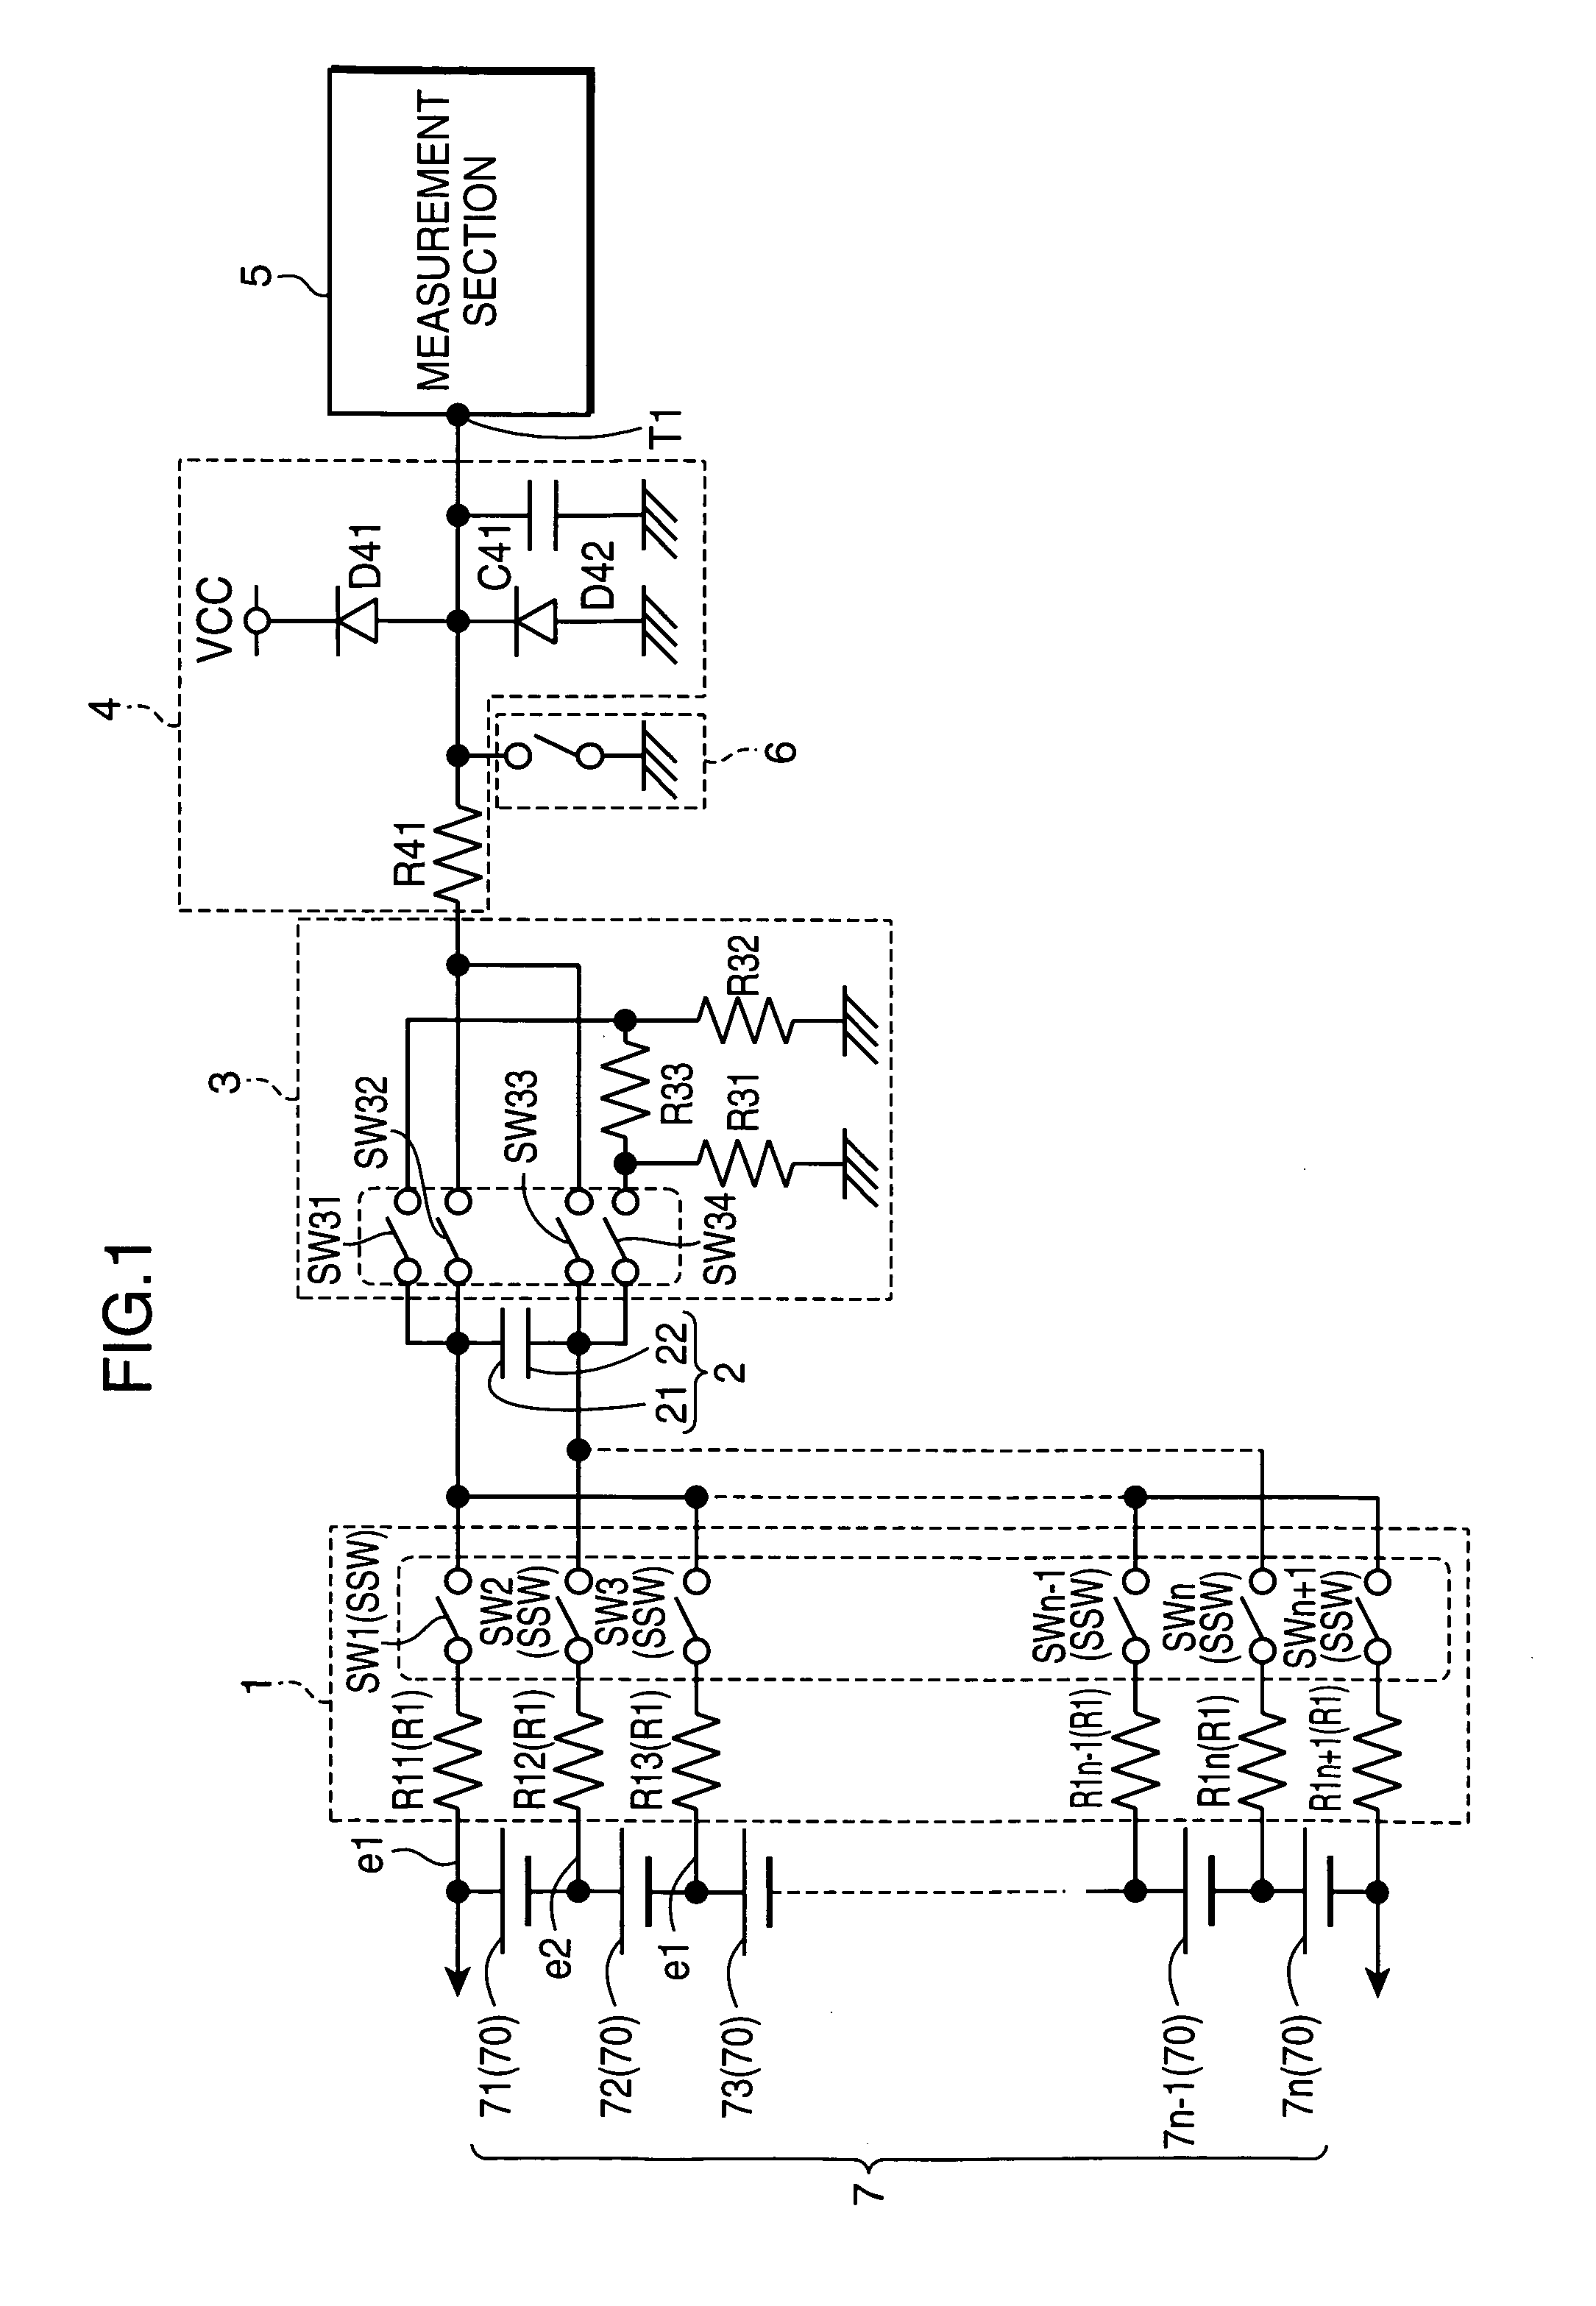 Voltage measurement apparatus and electrically-driven tool